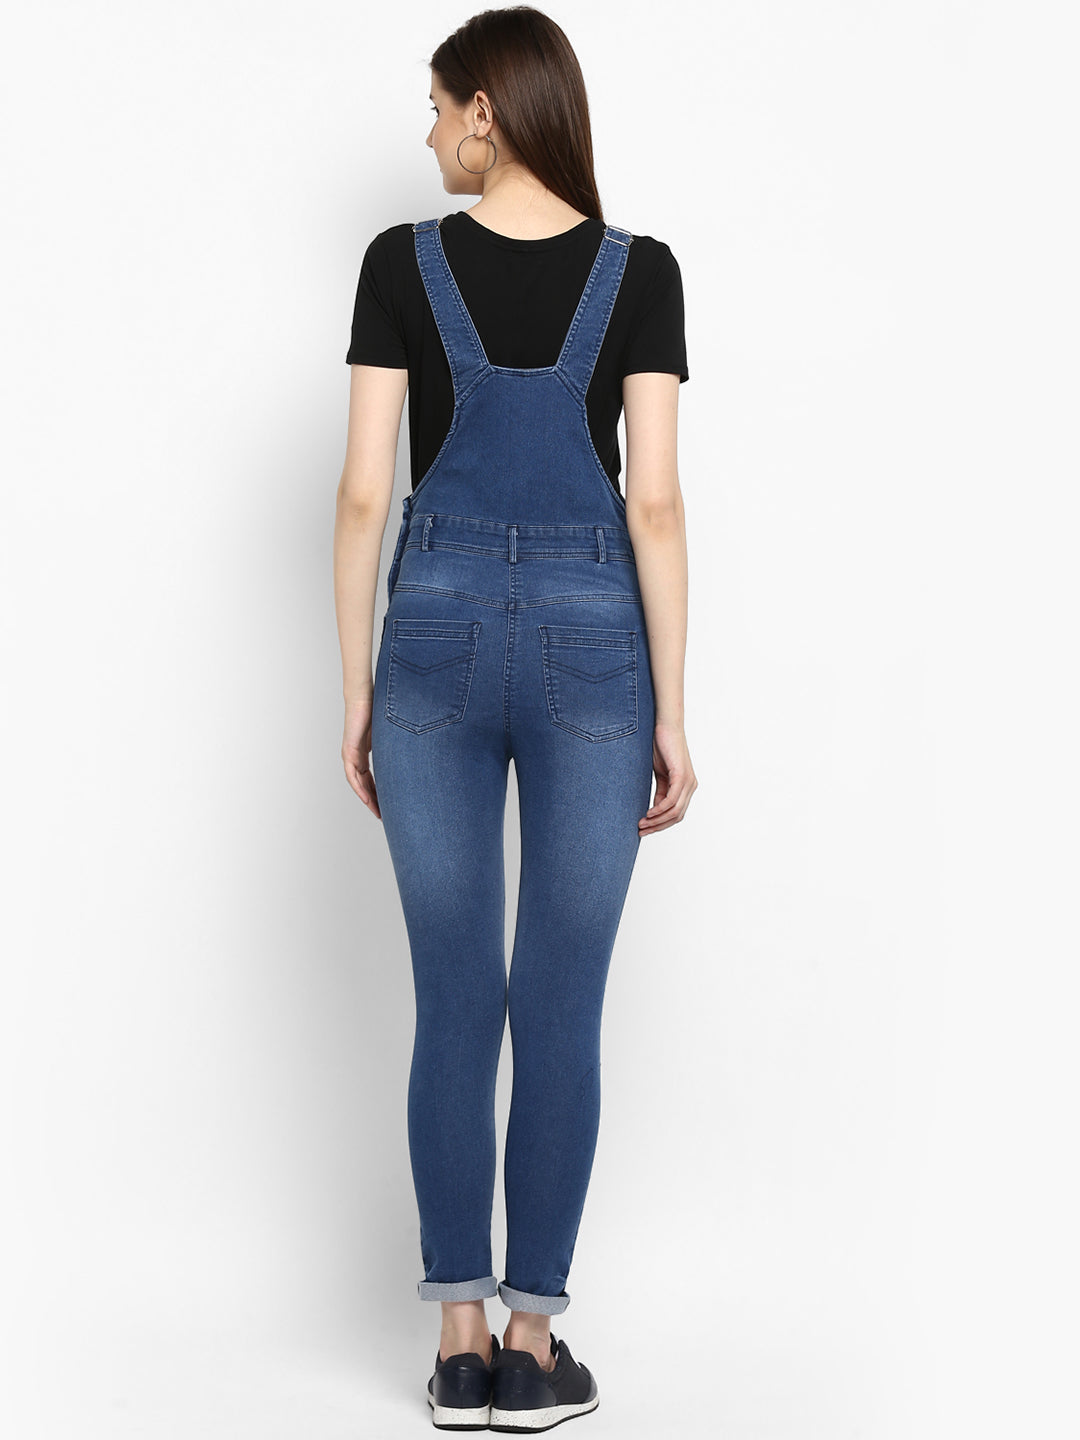 Women's Stretchable Denim Washed effect Dungarees(inner not provided)